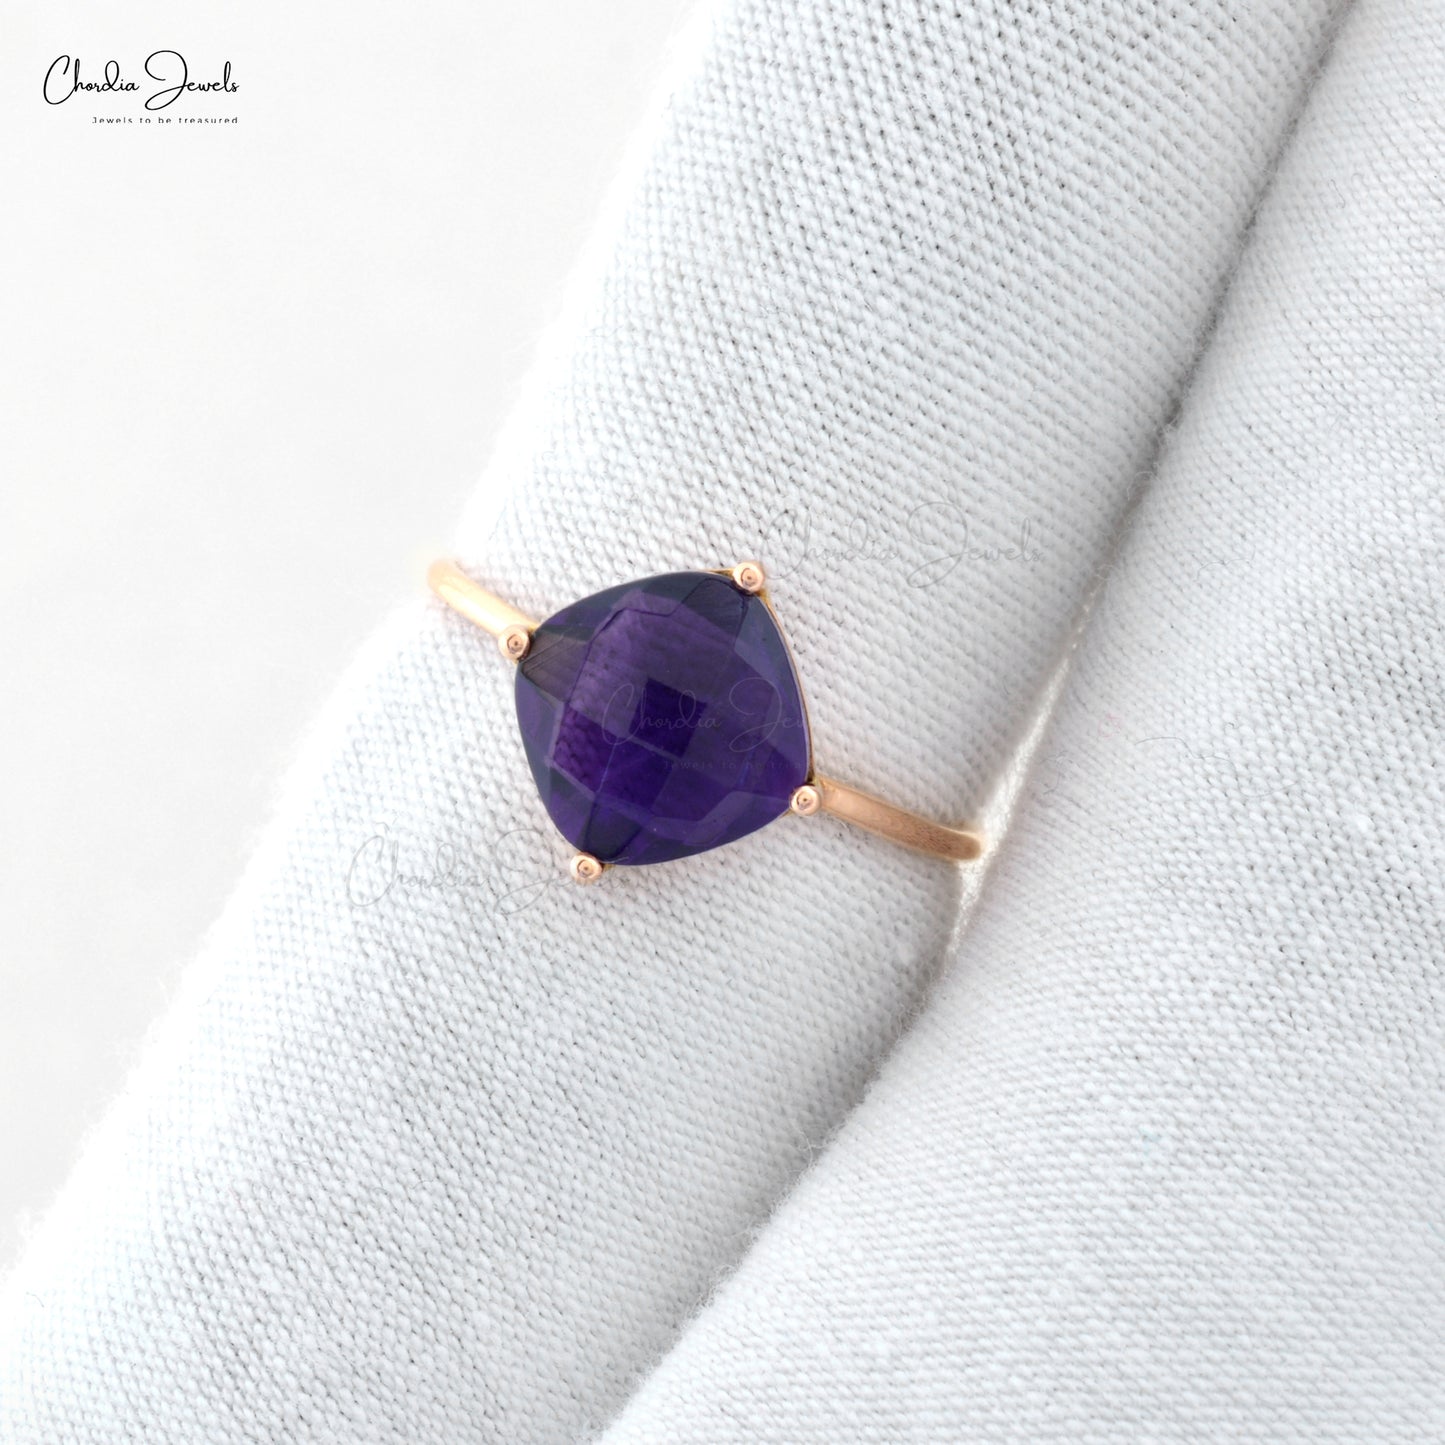 Minimalist Amethyst Gemstone Solitaire Ring 14k Solid Rose Gold 2.4ct Birthstone Ring For Love